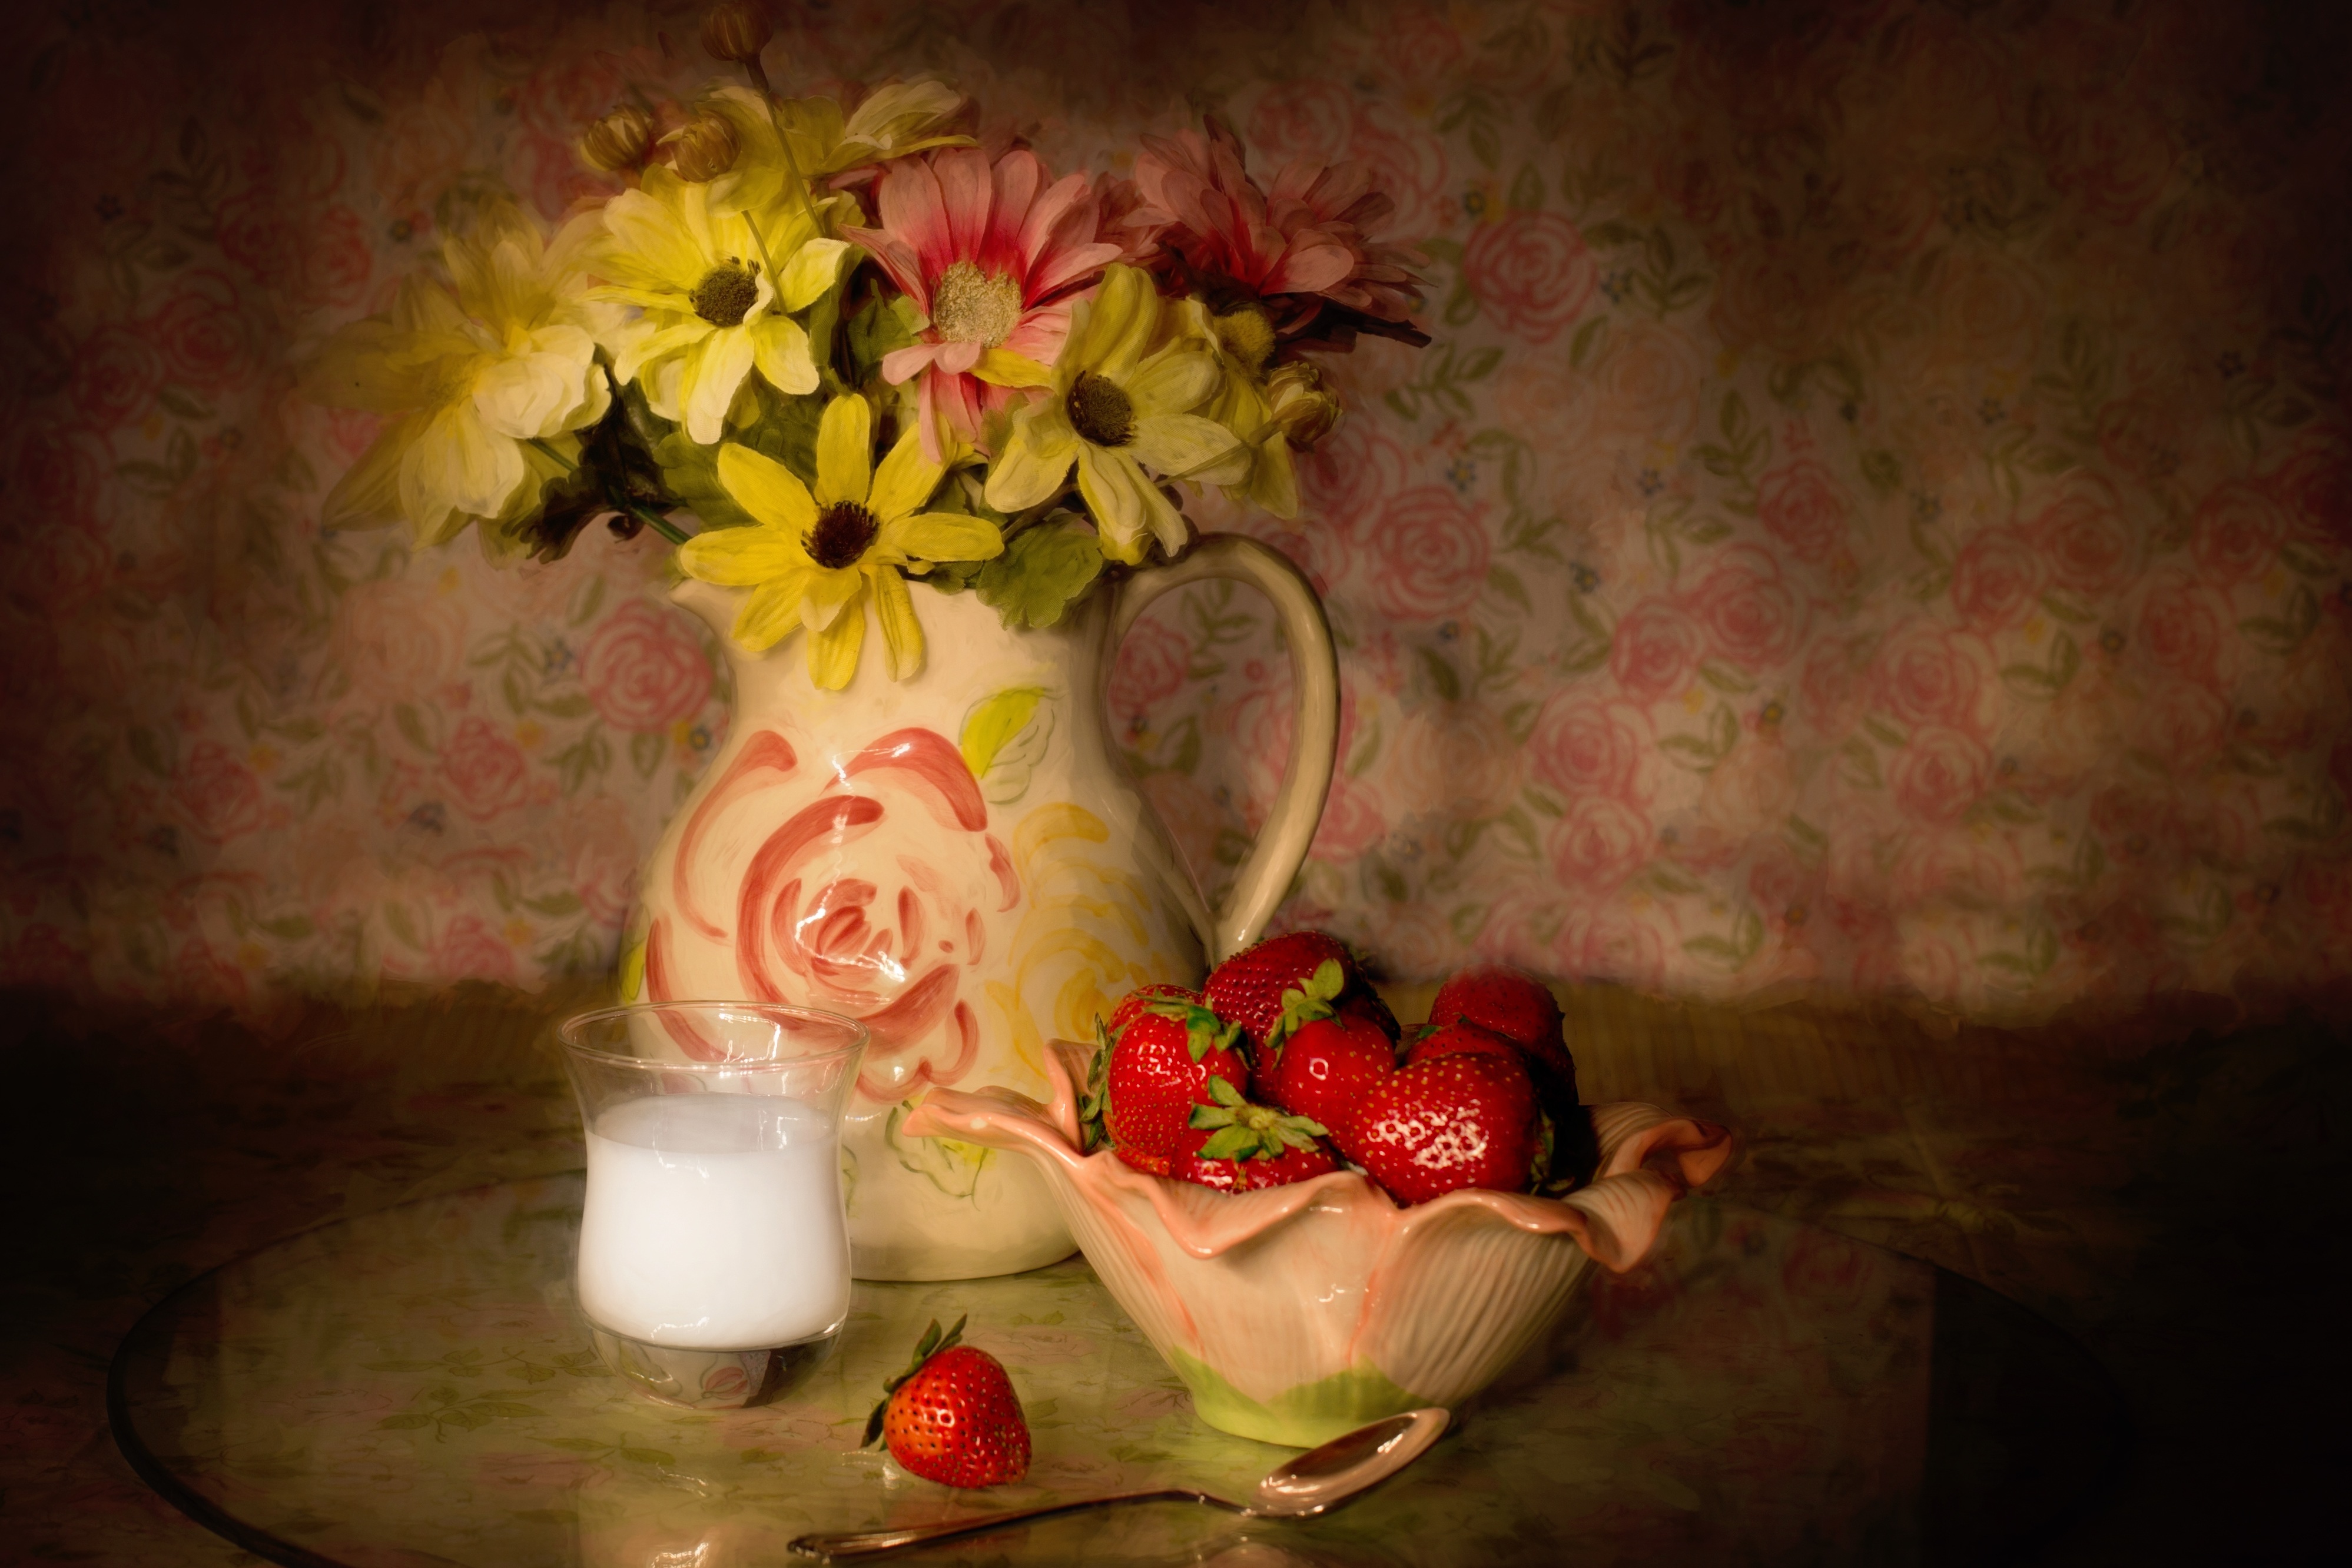 Flowers in a pitcher on a table with strawberries.